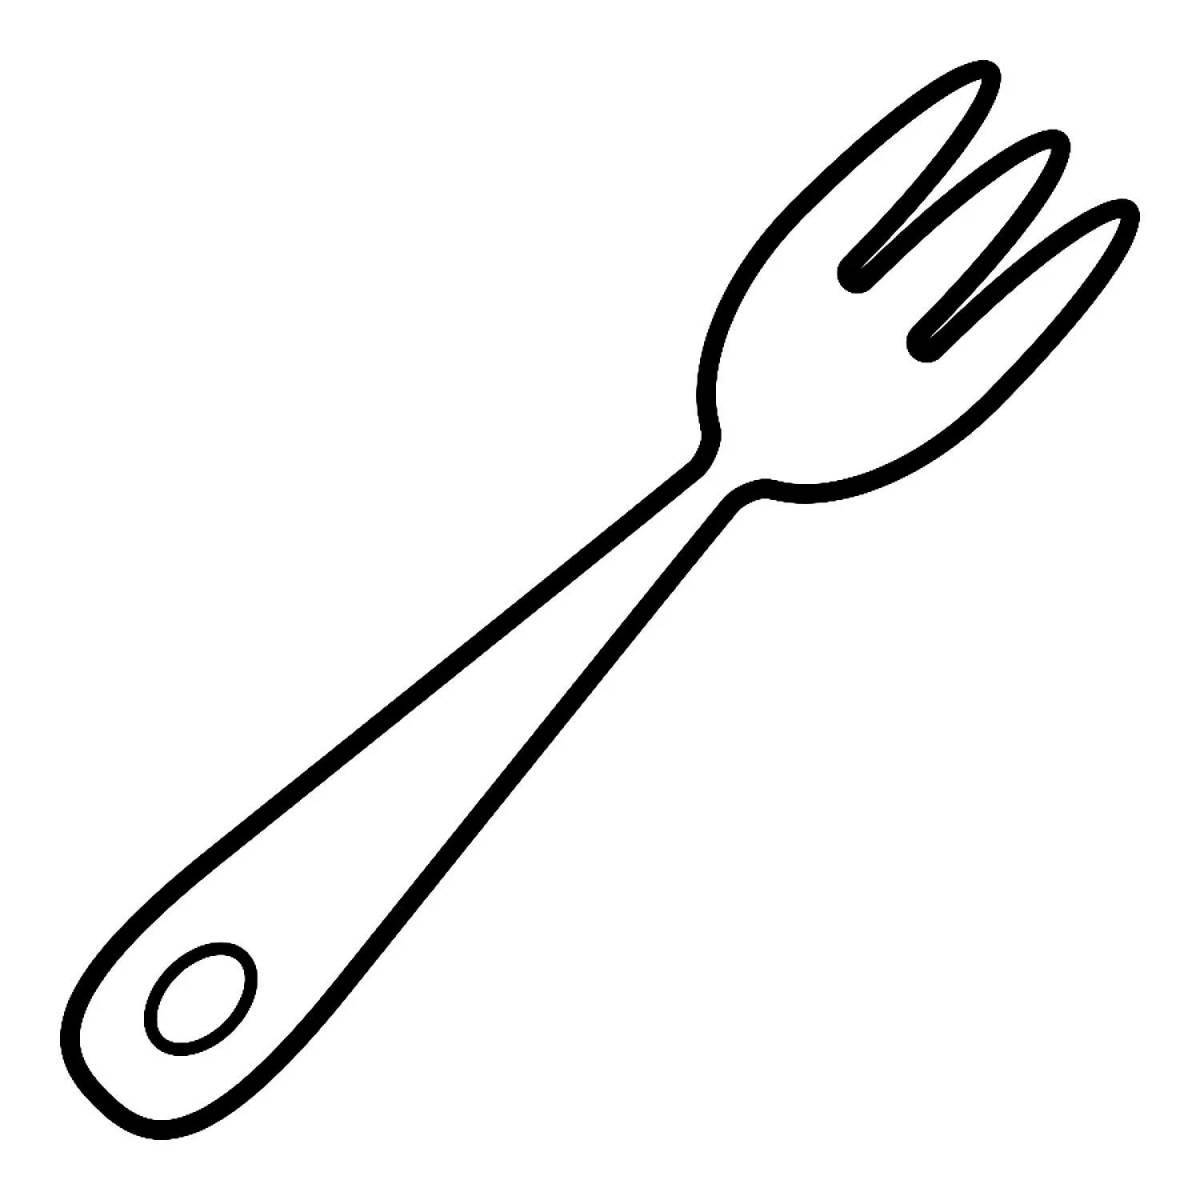 Fun table spoon coloring page